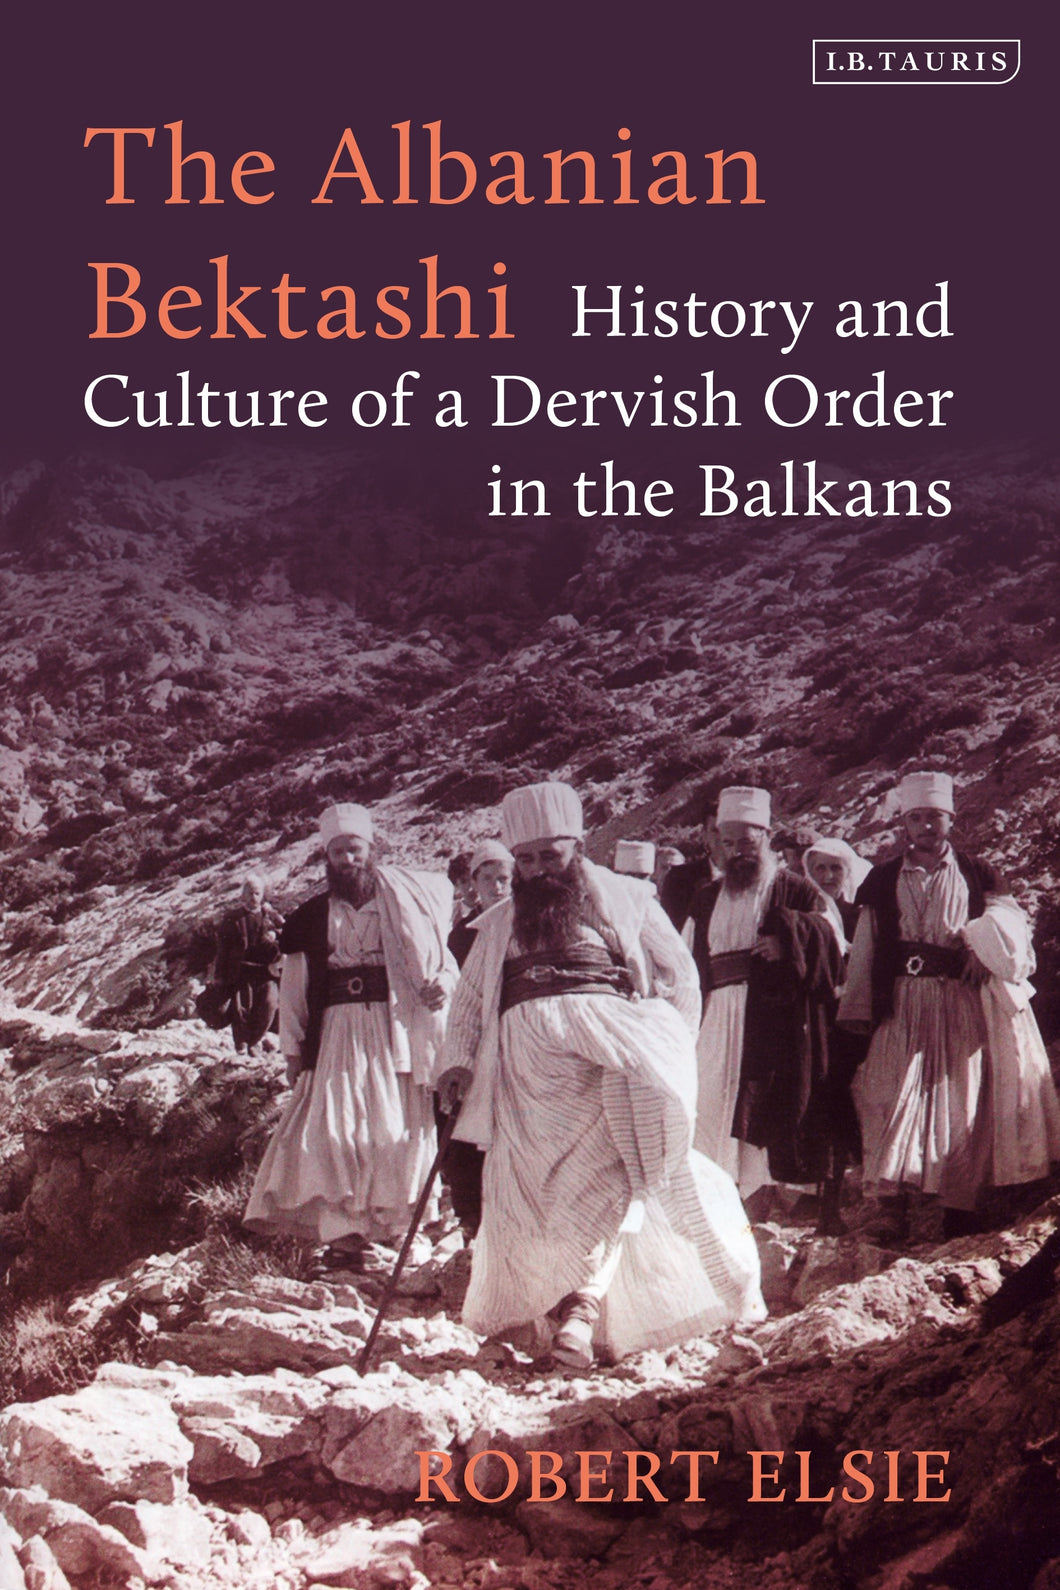 The Albanian Bektashi: History and Culture of a Dervish Order in the Balkans